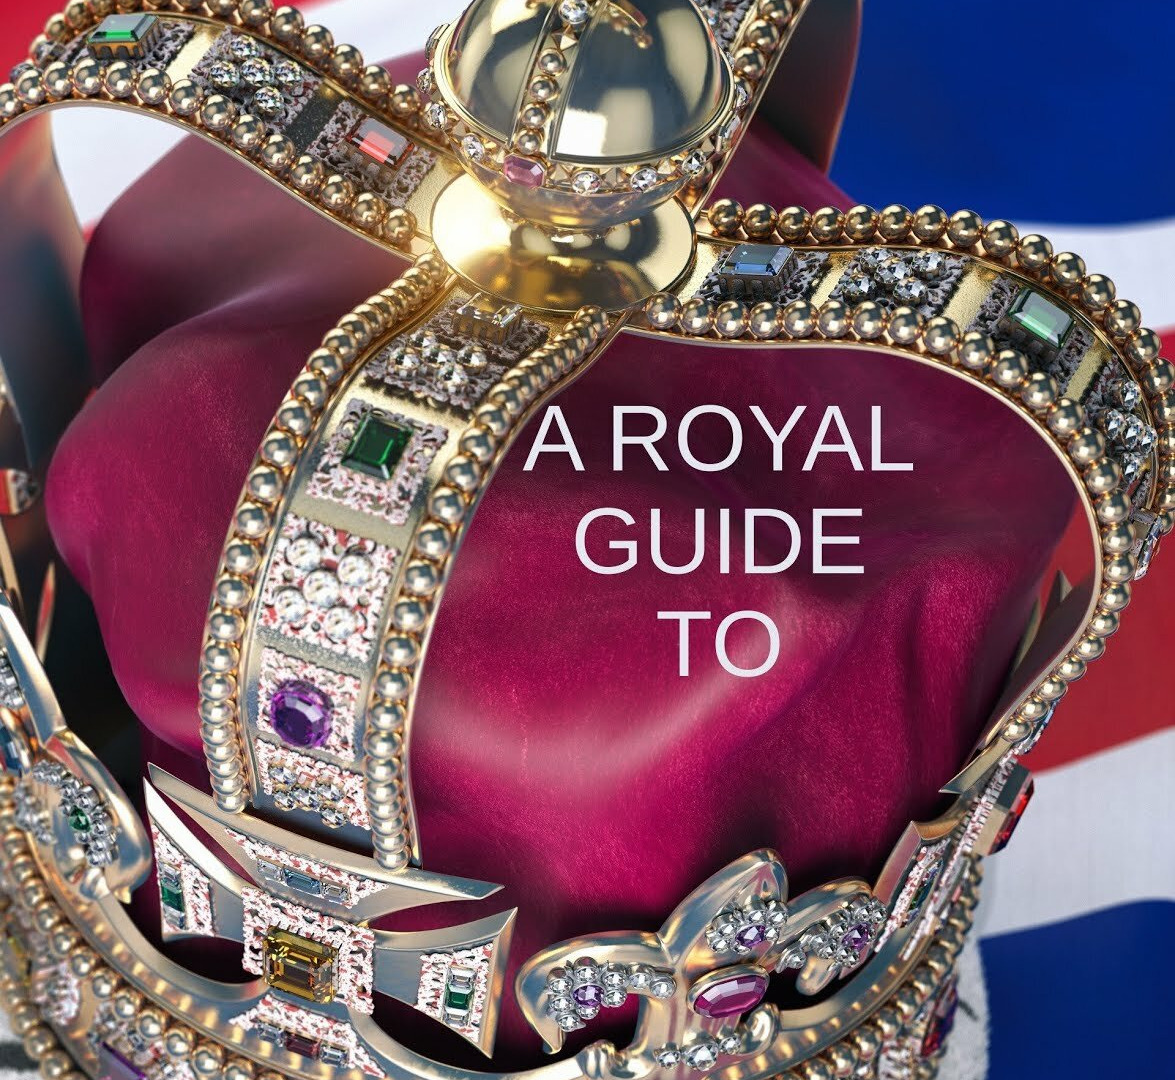 Show A Royal Guide to...